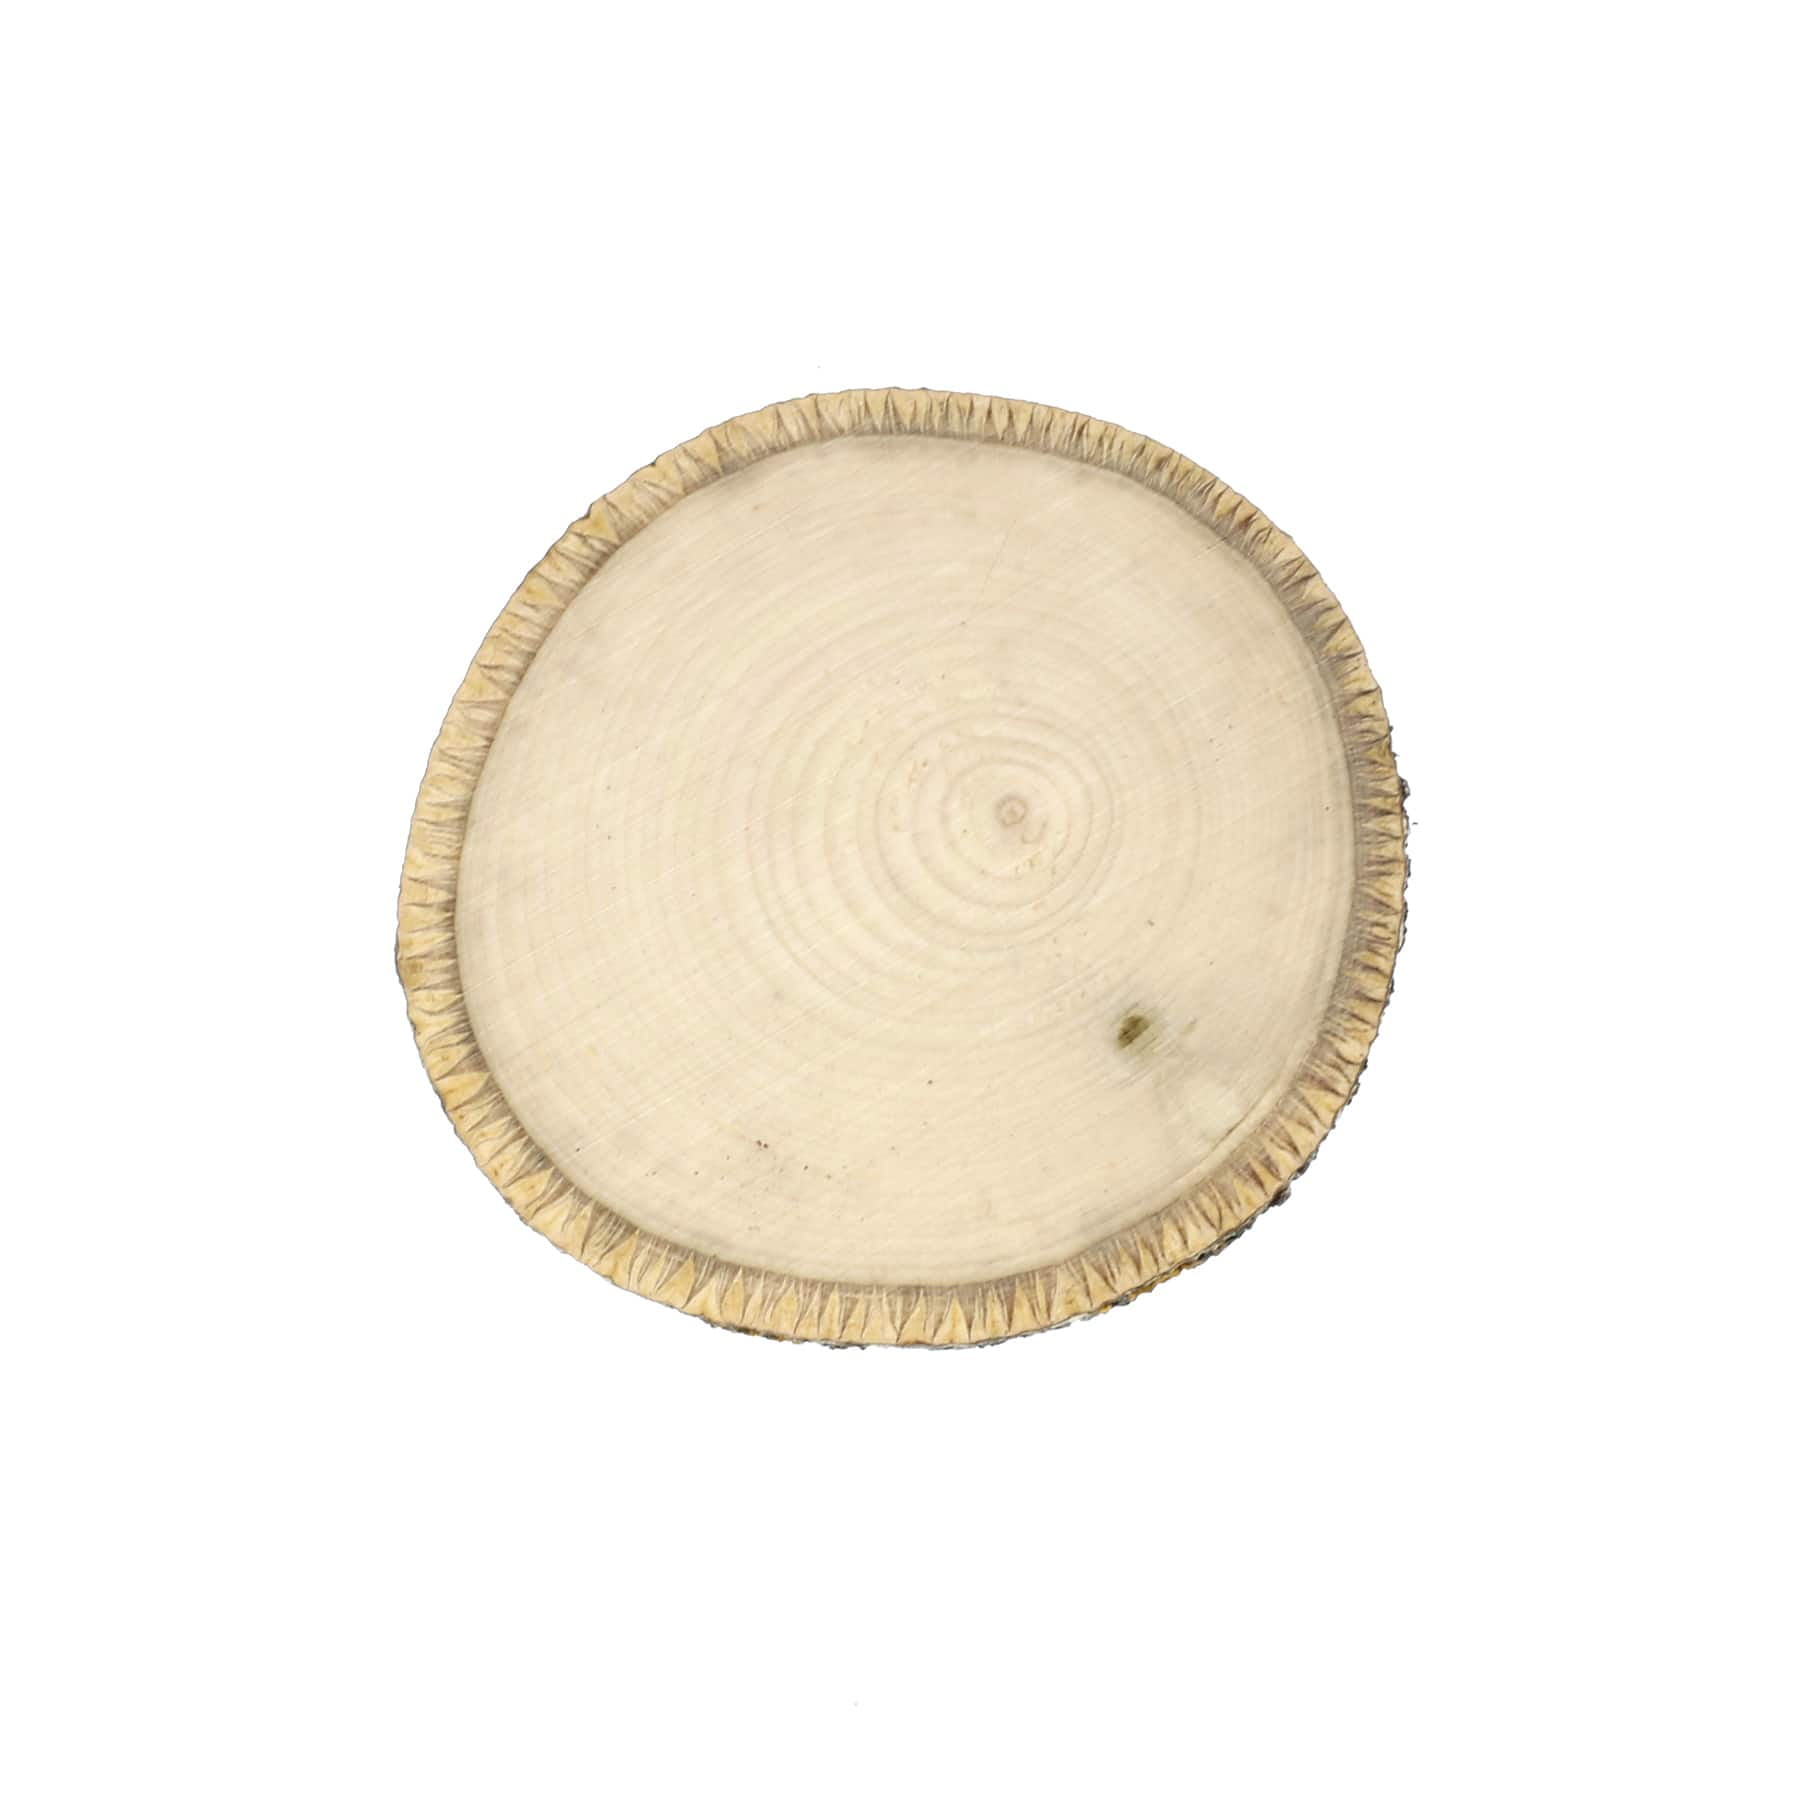 Good Wood by Leisure Arts Coaster Rounded Square 4 x 4 - 4 pieces round  wooden craft squares - unfinished square wooden coaster - 4 inch x 4 inch  wood squares blank